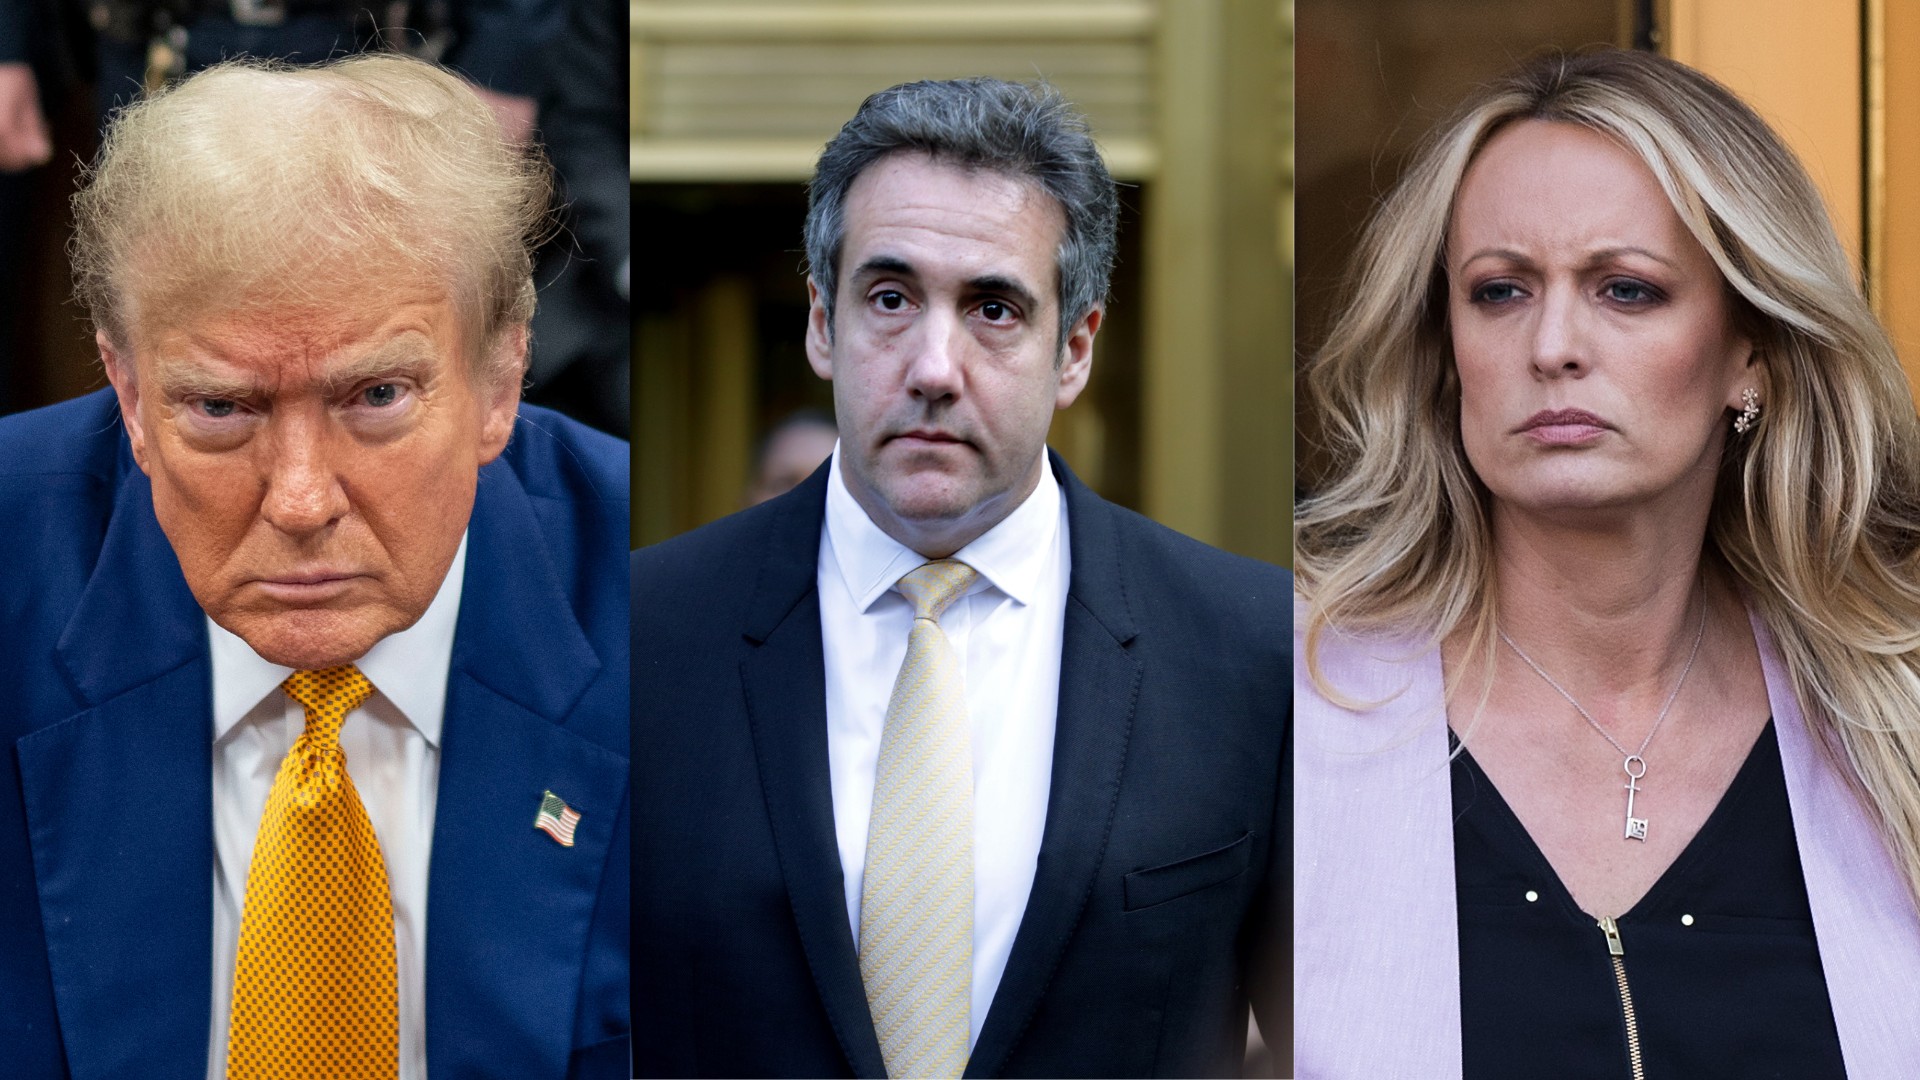 “A real smoking gun”: How Trump reacted as secret Cohen recording played in court